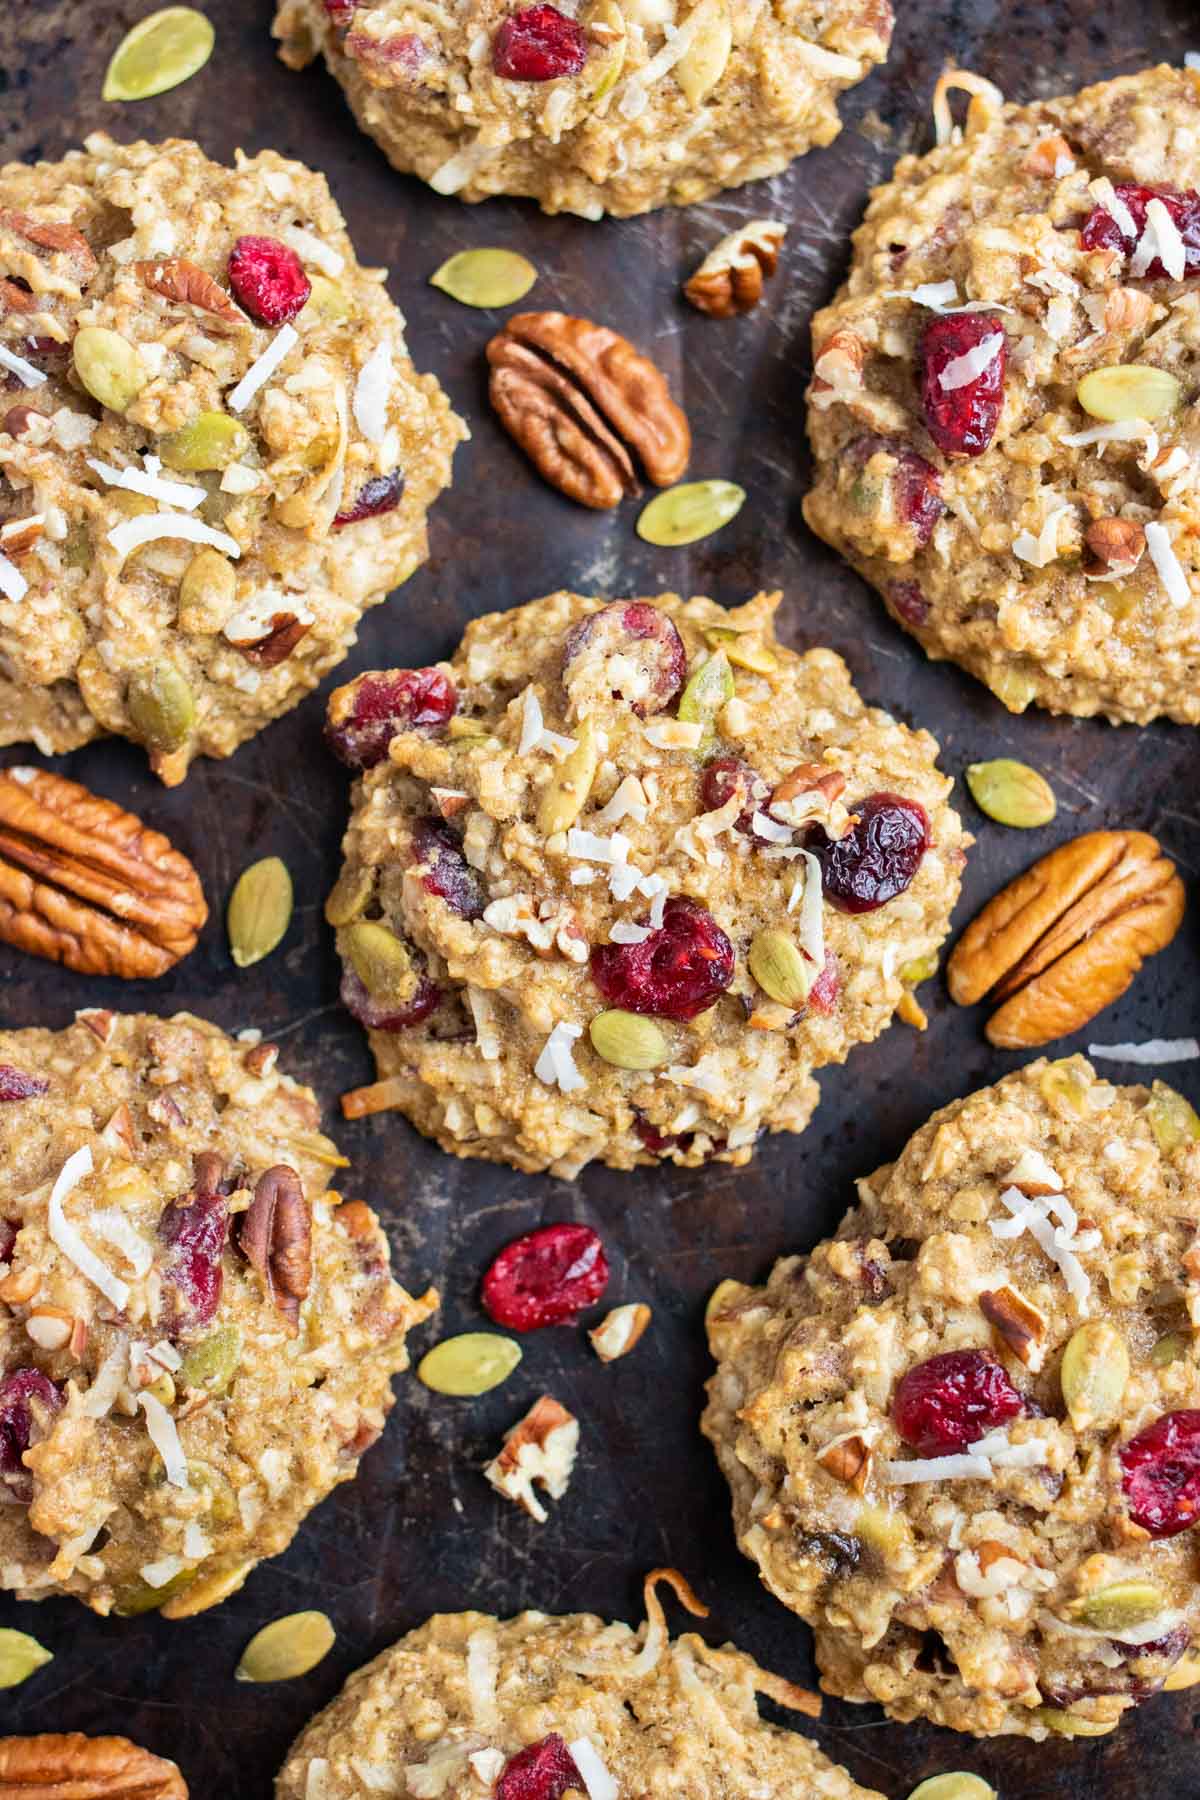 These breakfast cookies are loaded with healthy ingredients.